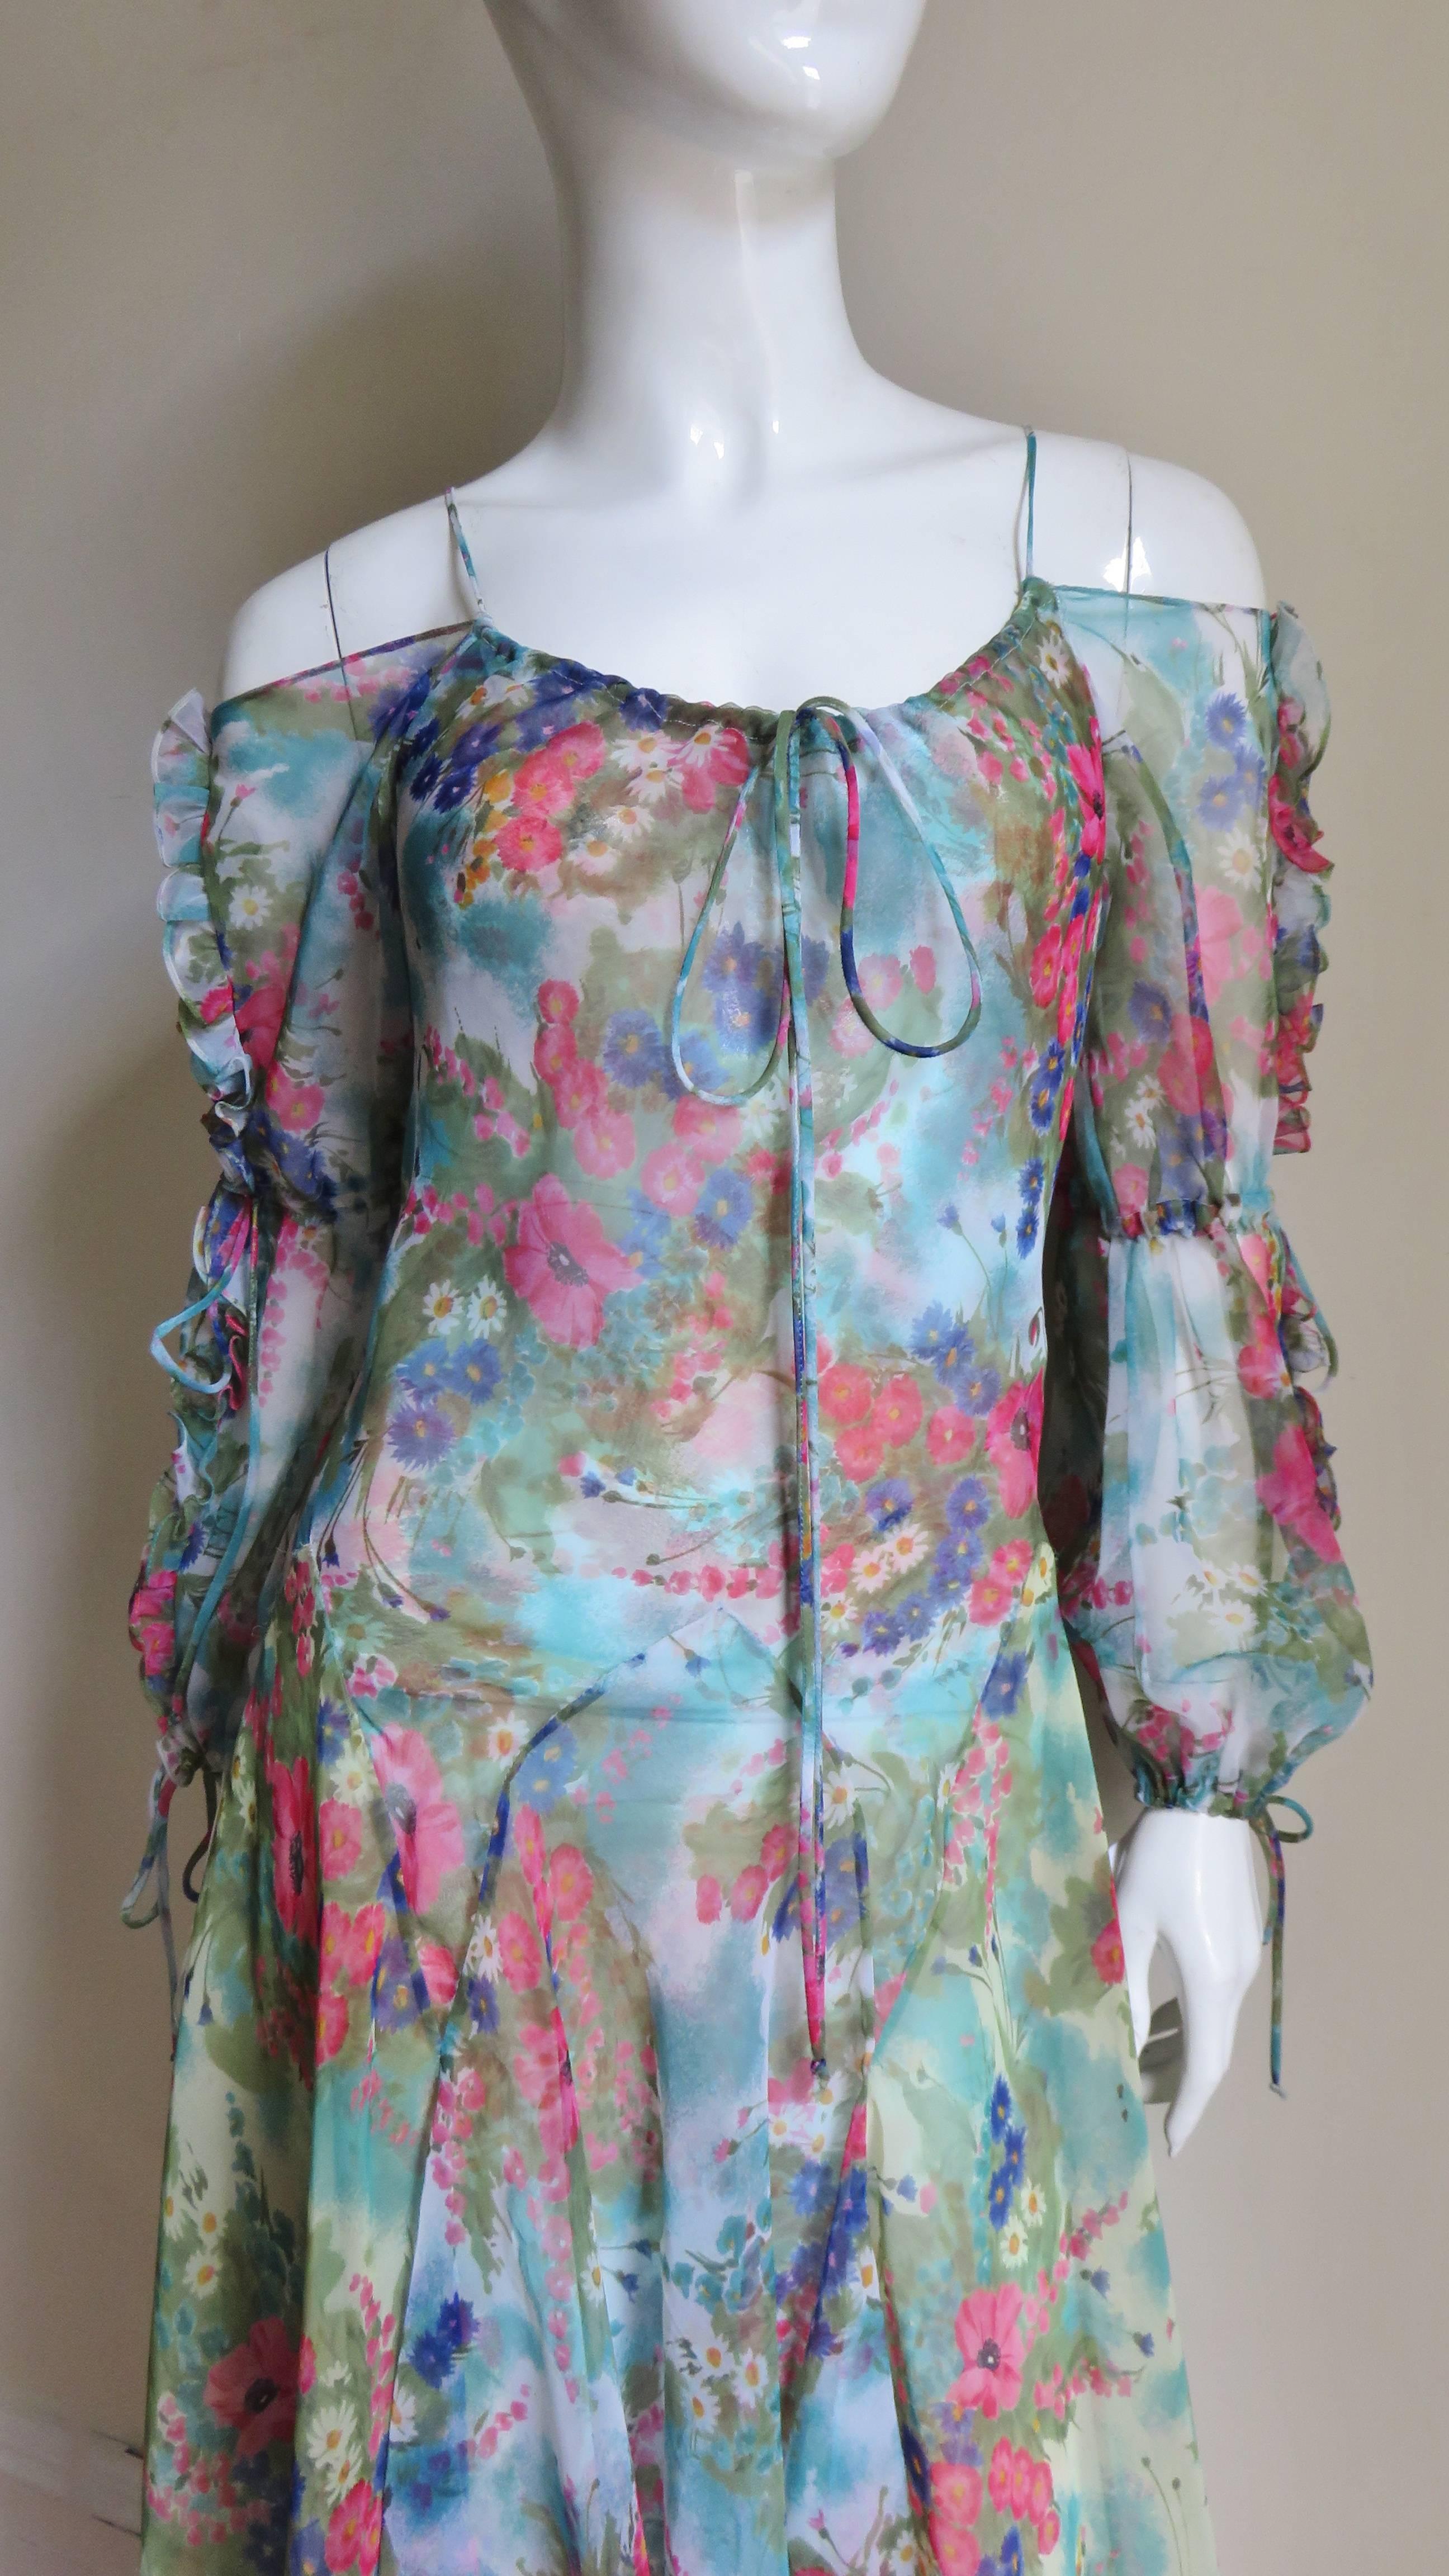 A feminine flower pattern silk dress from Giorgio Sant'Angelo in blues, reds, greens and white.  It has exposed shoulders with spaghetti straps, 2 cut outs along the sleeves and functional adjustable drawstrings above the elbows and at the wrists.